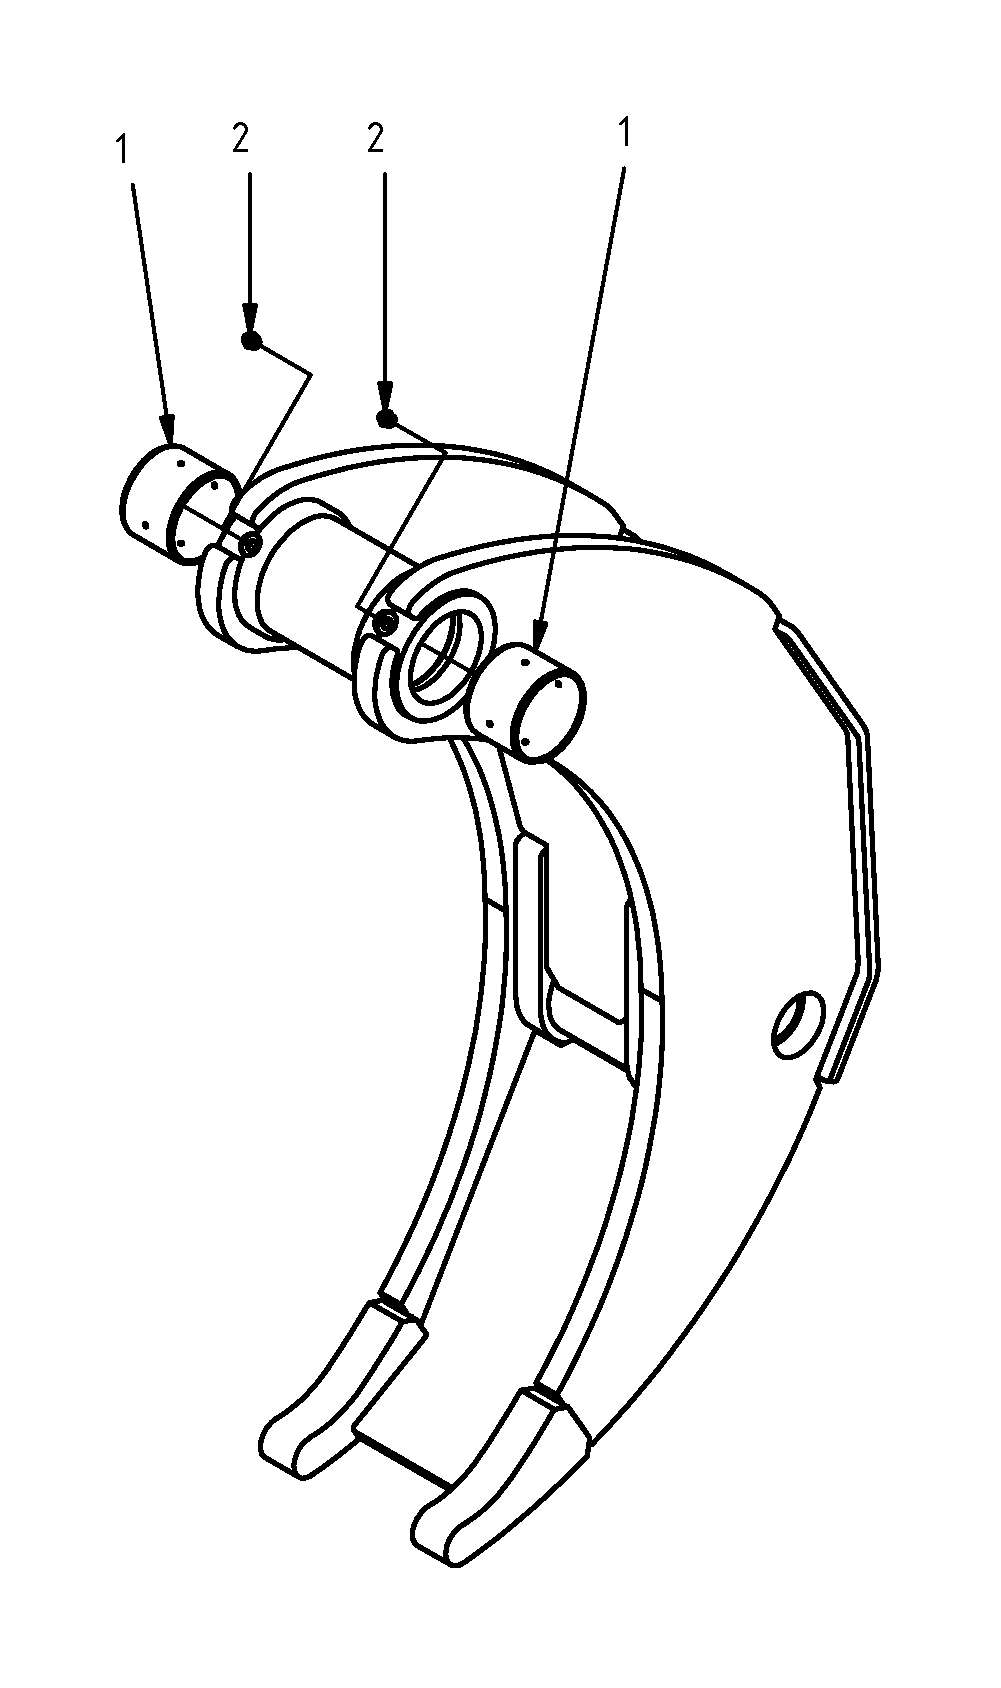 grapple claw inside